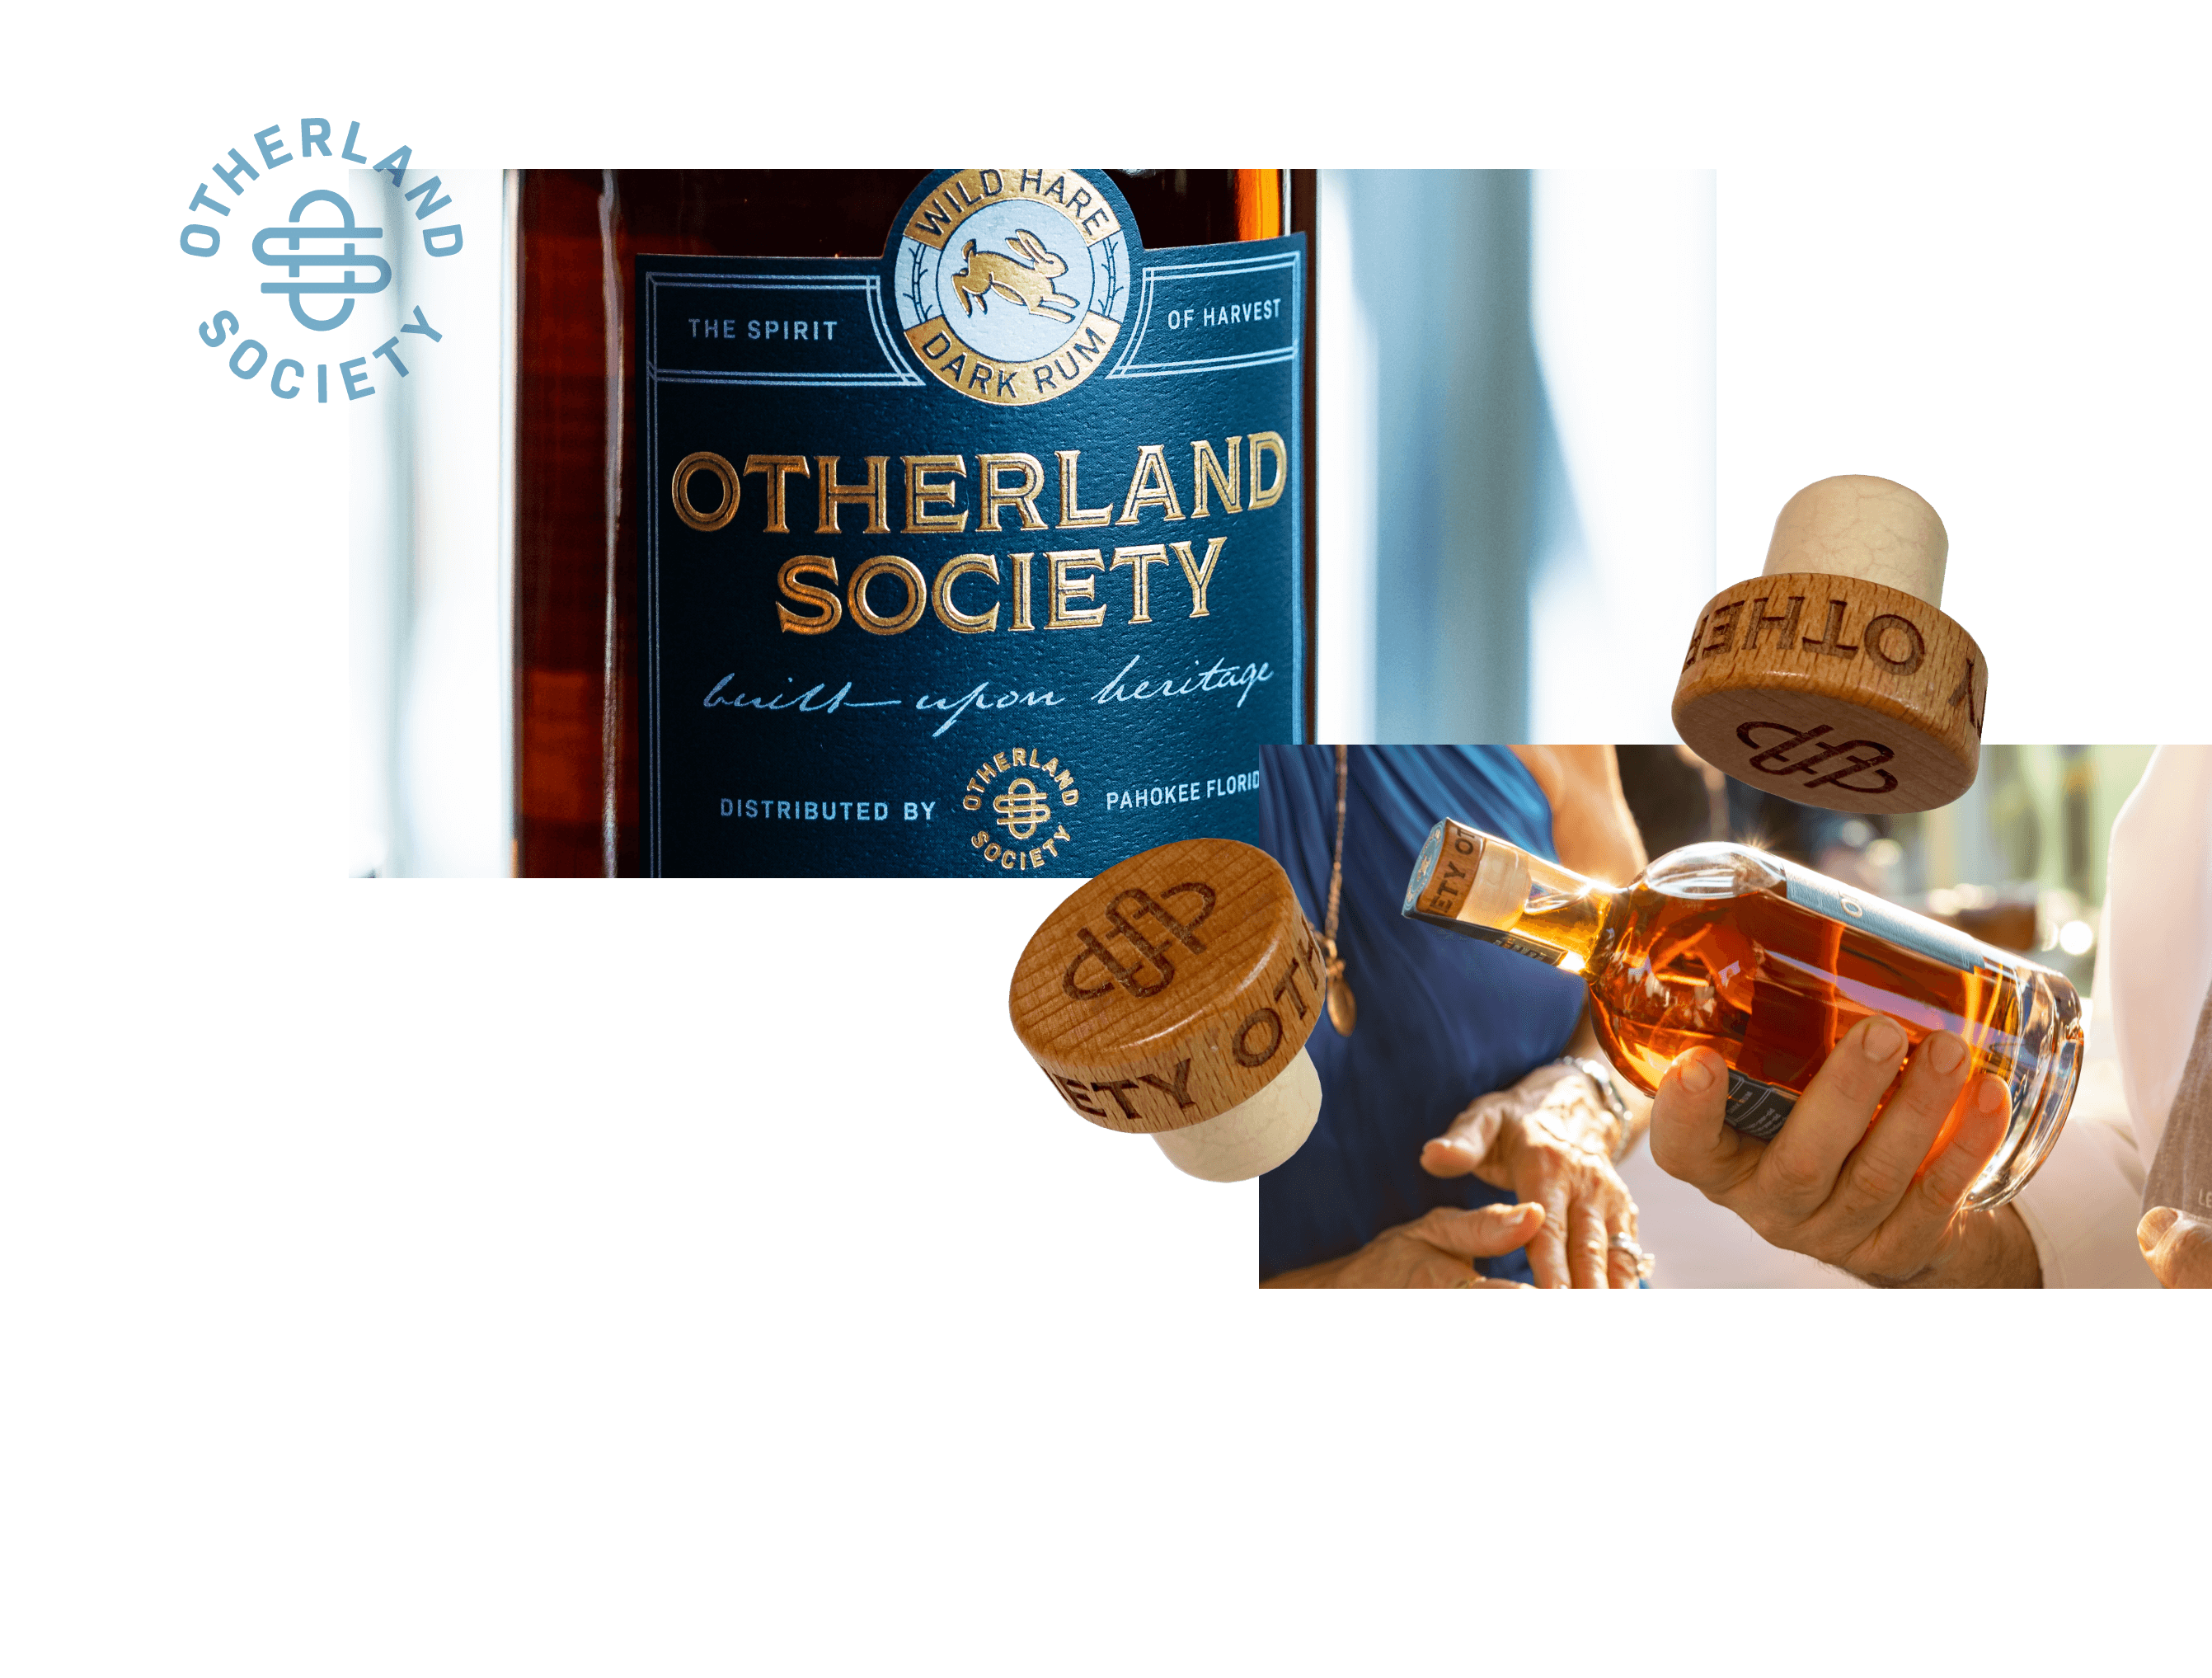 Otherland Society rum bottle packaging detail shot with engraved bottle caps and monogram logo